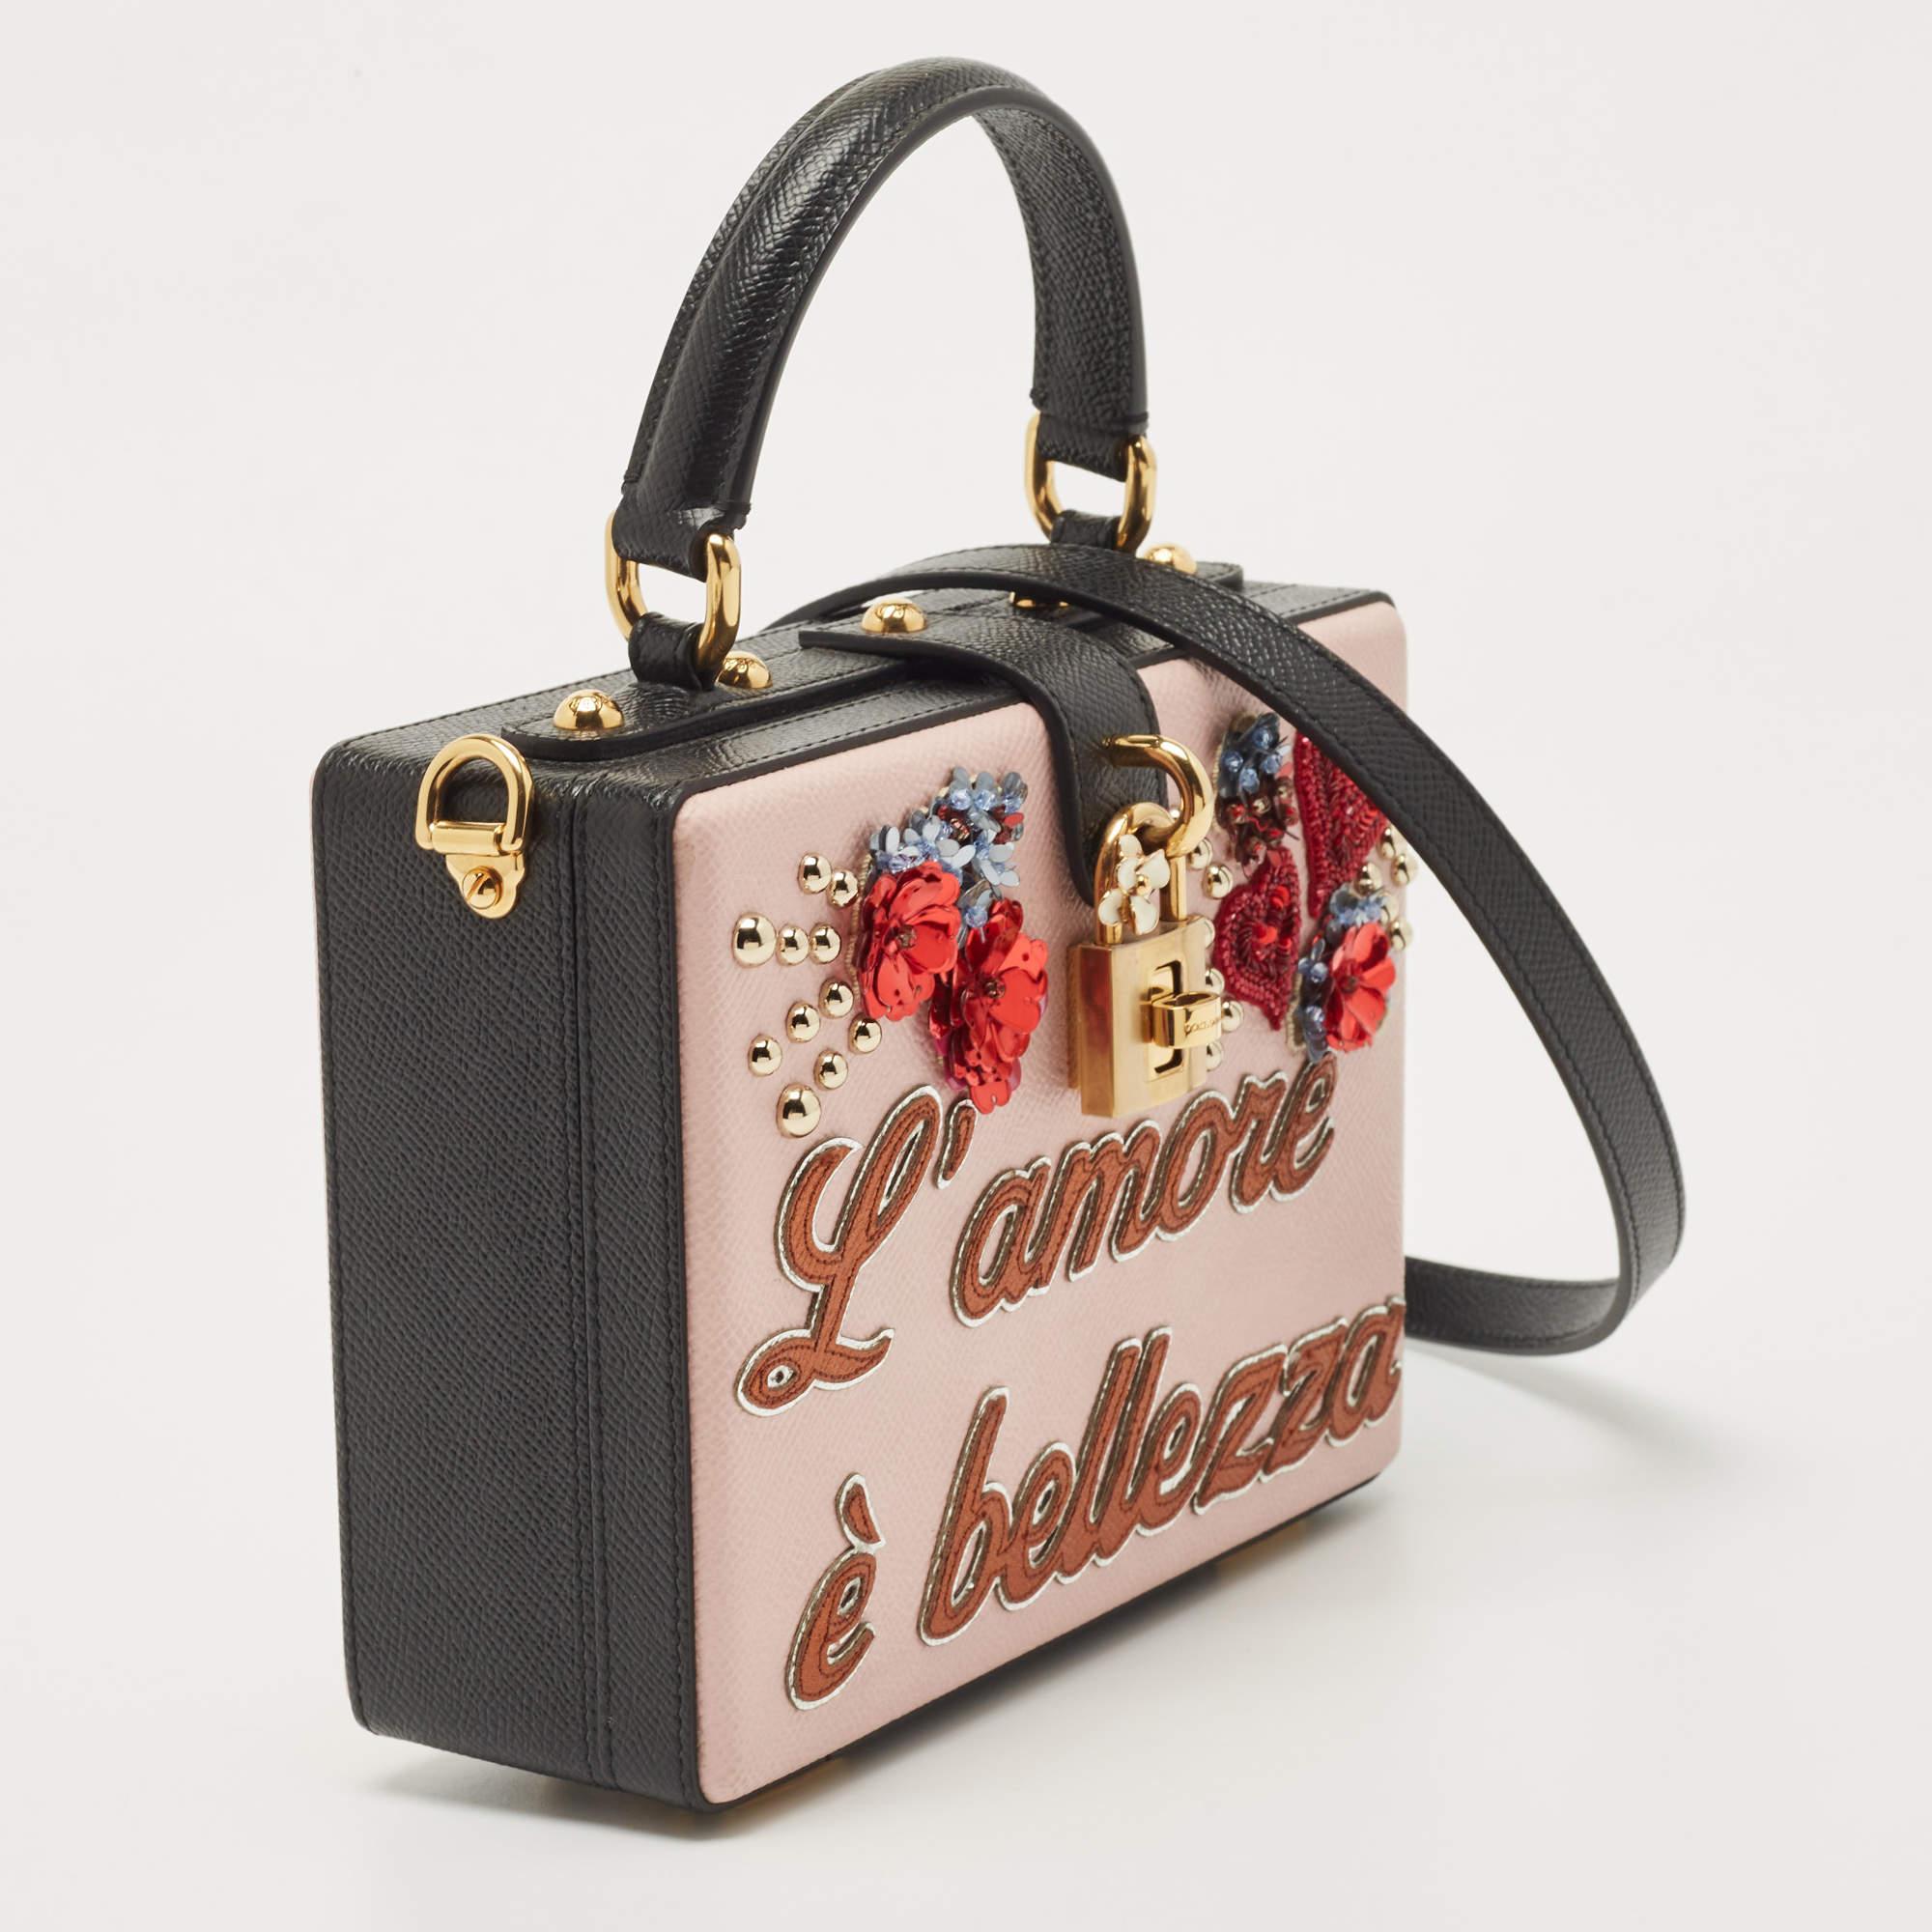 The Dolce & Gabbana L'Amore bag is a luxurious and eye-catching accessory. Crafted from premium leather, it features a vibrant pink and black color scheme, intricate embellishments, and a structured box design. The top handle adds a touch of